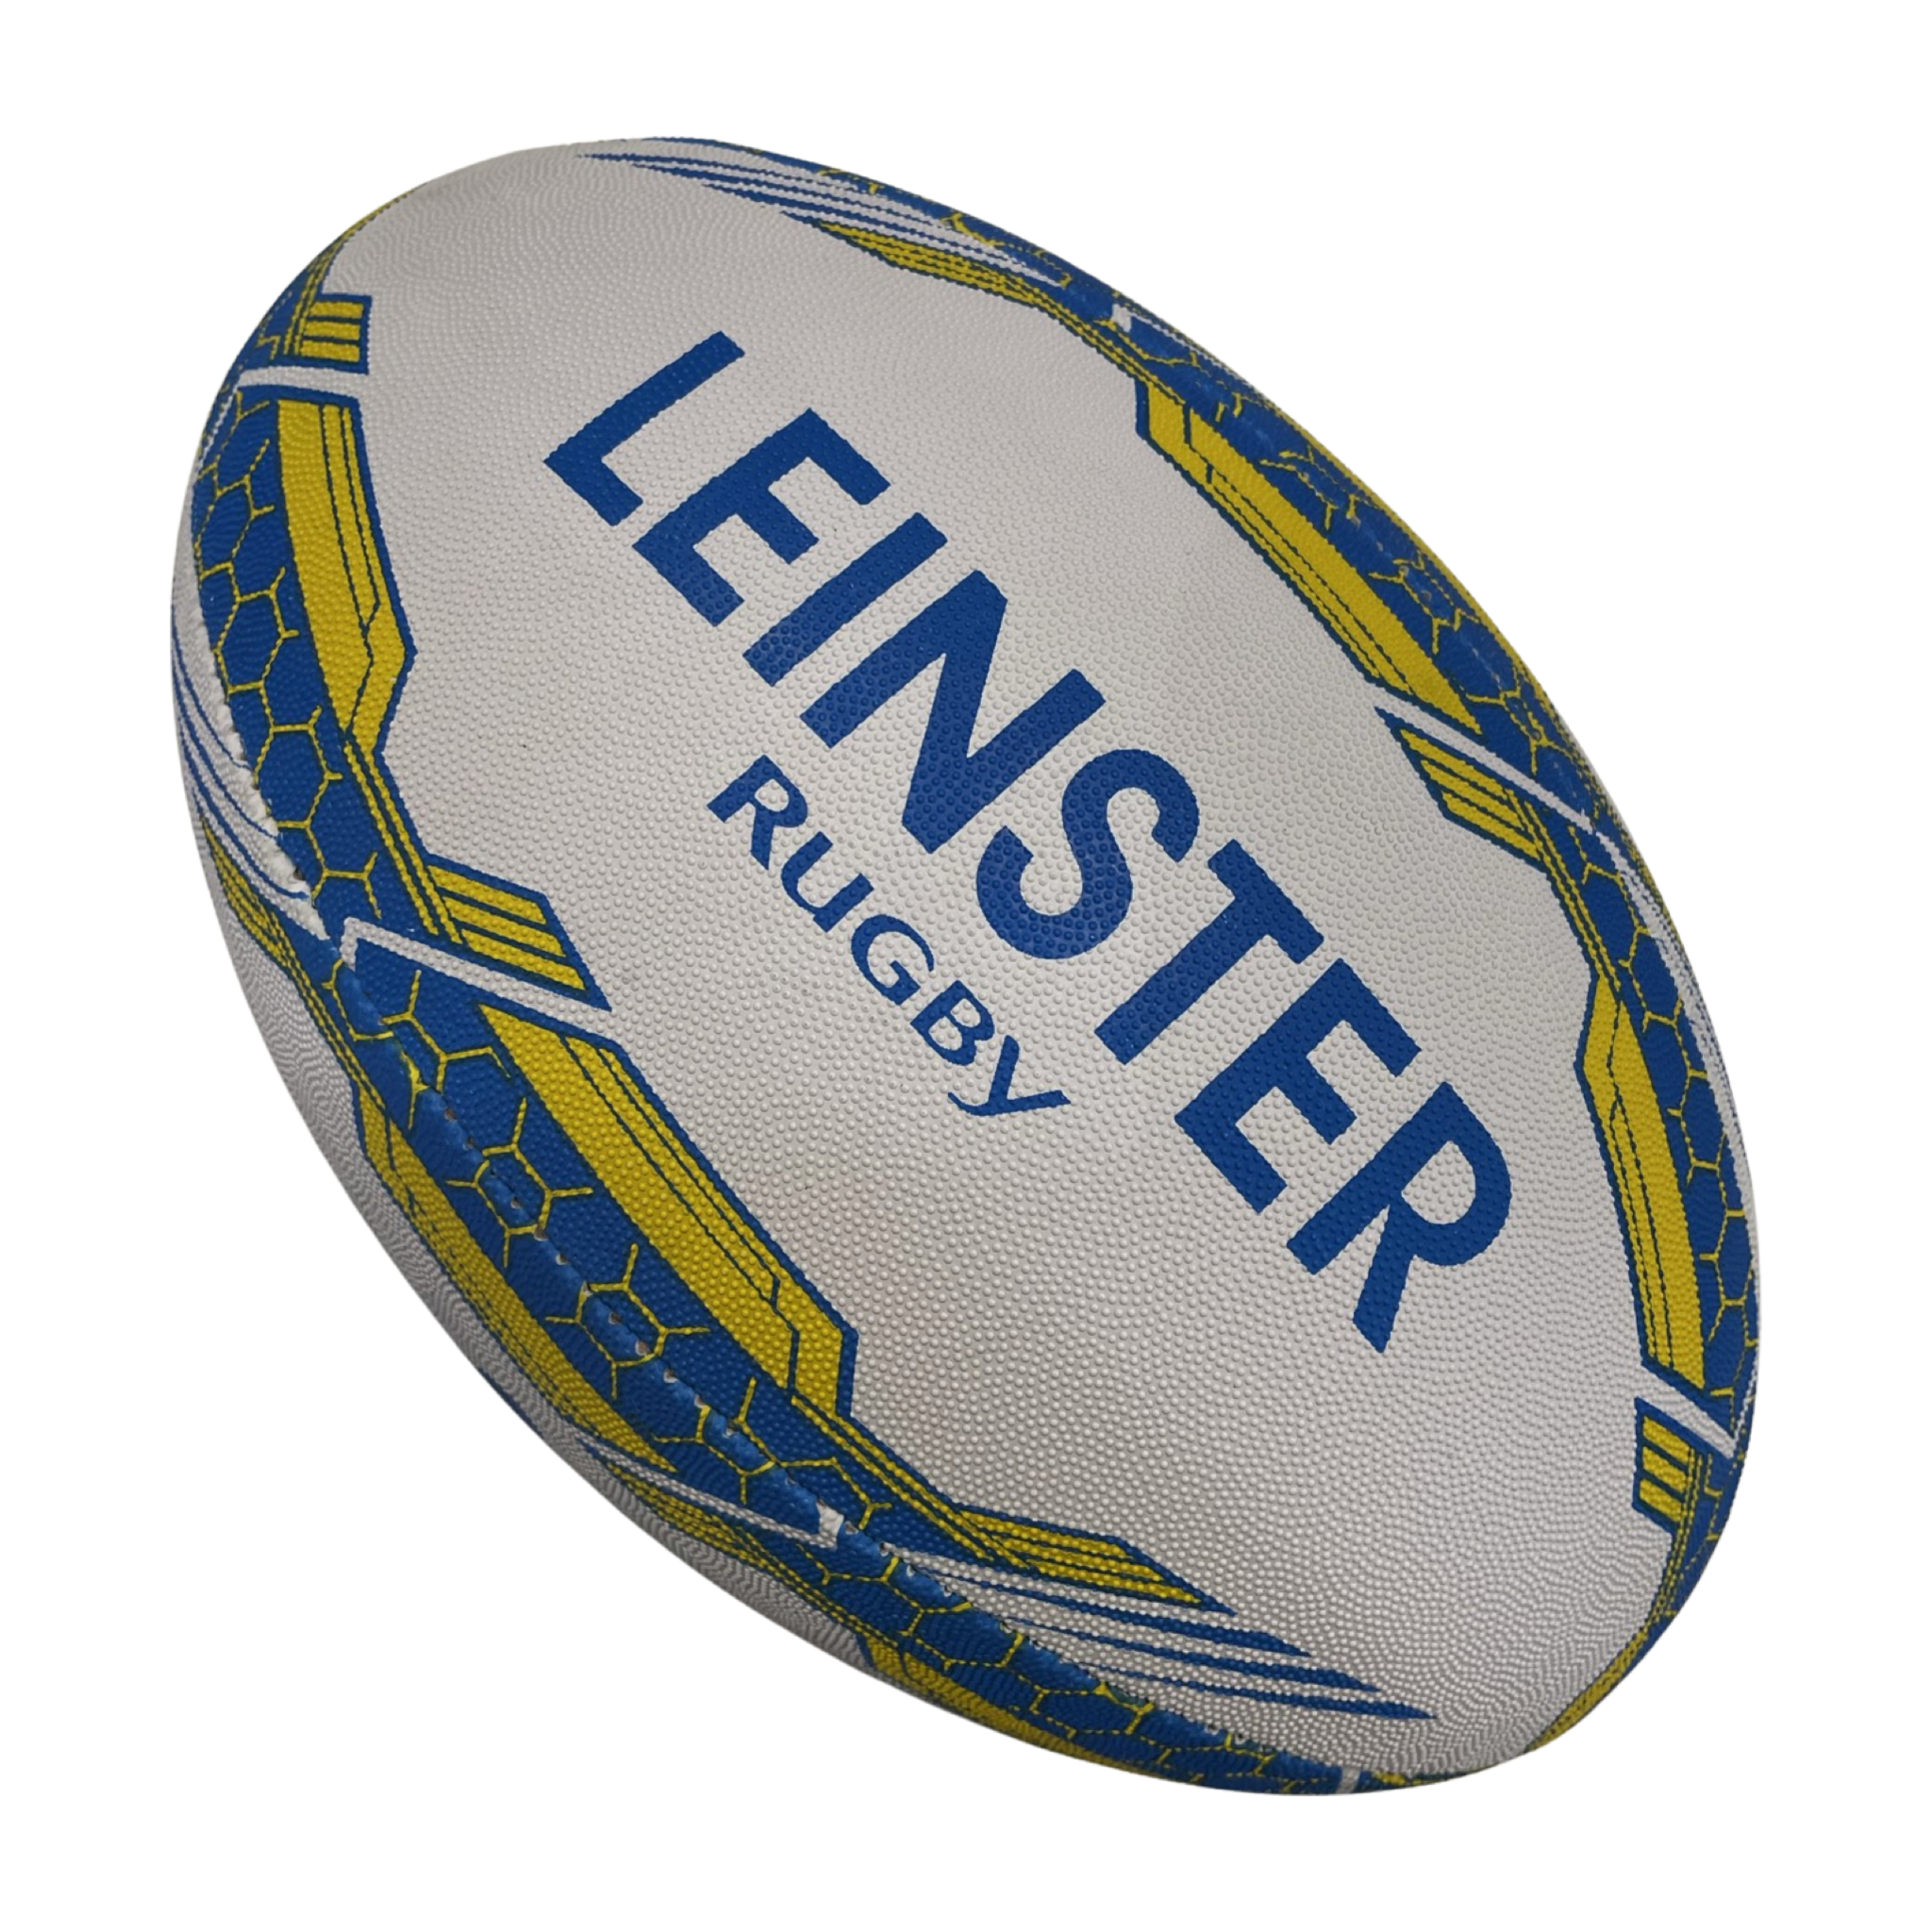 Leinster Mini Rugby Ball